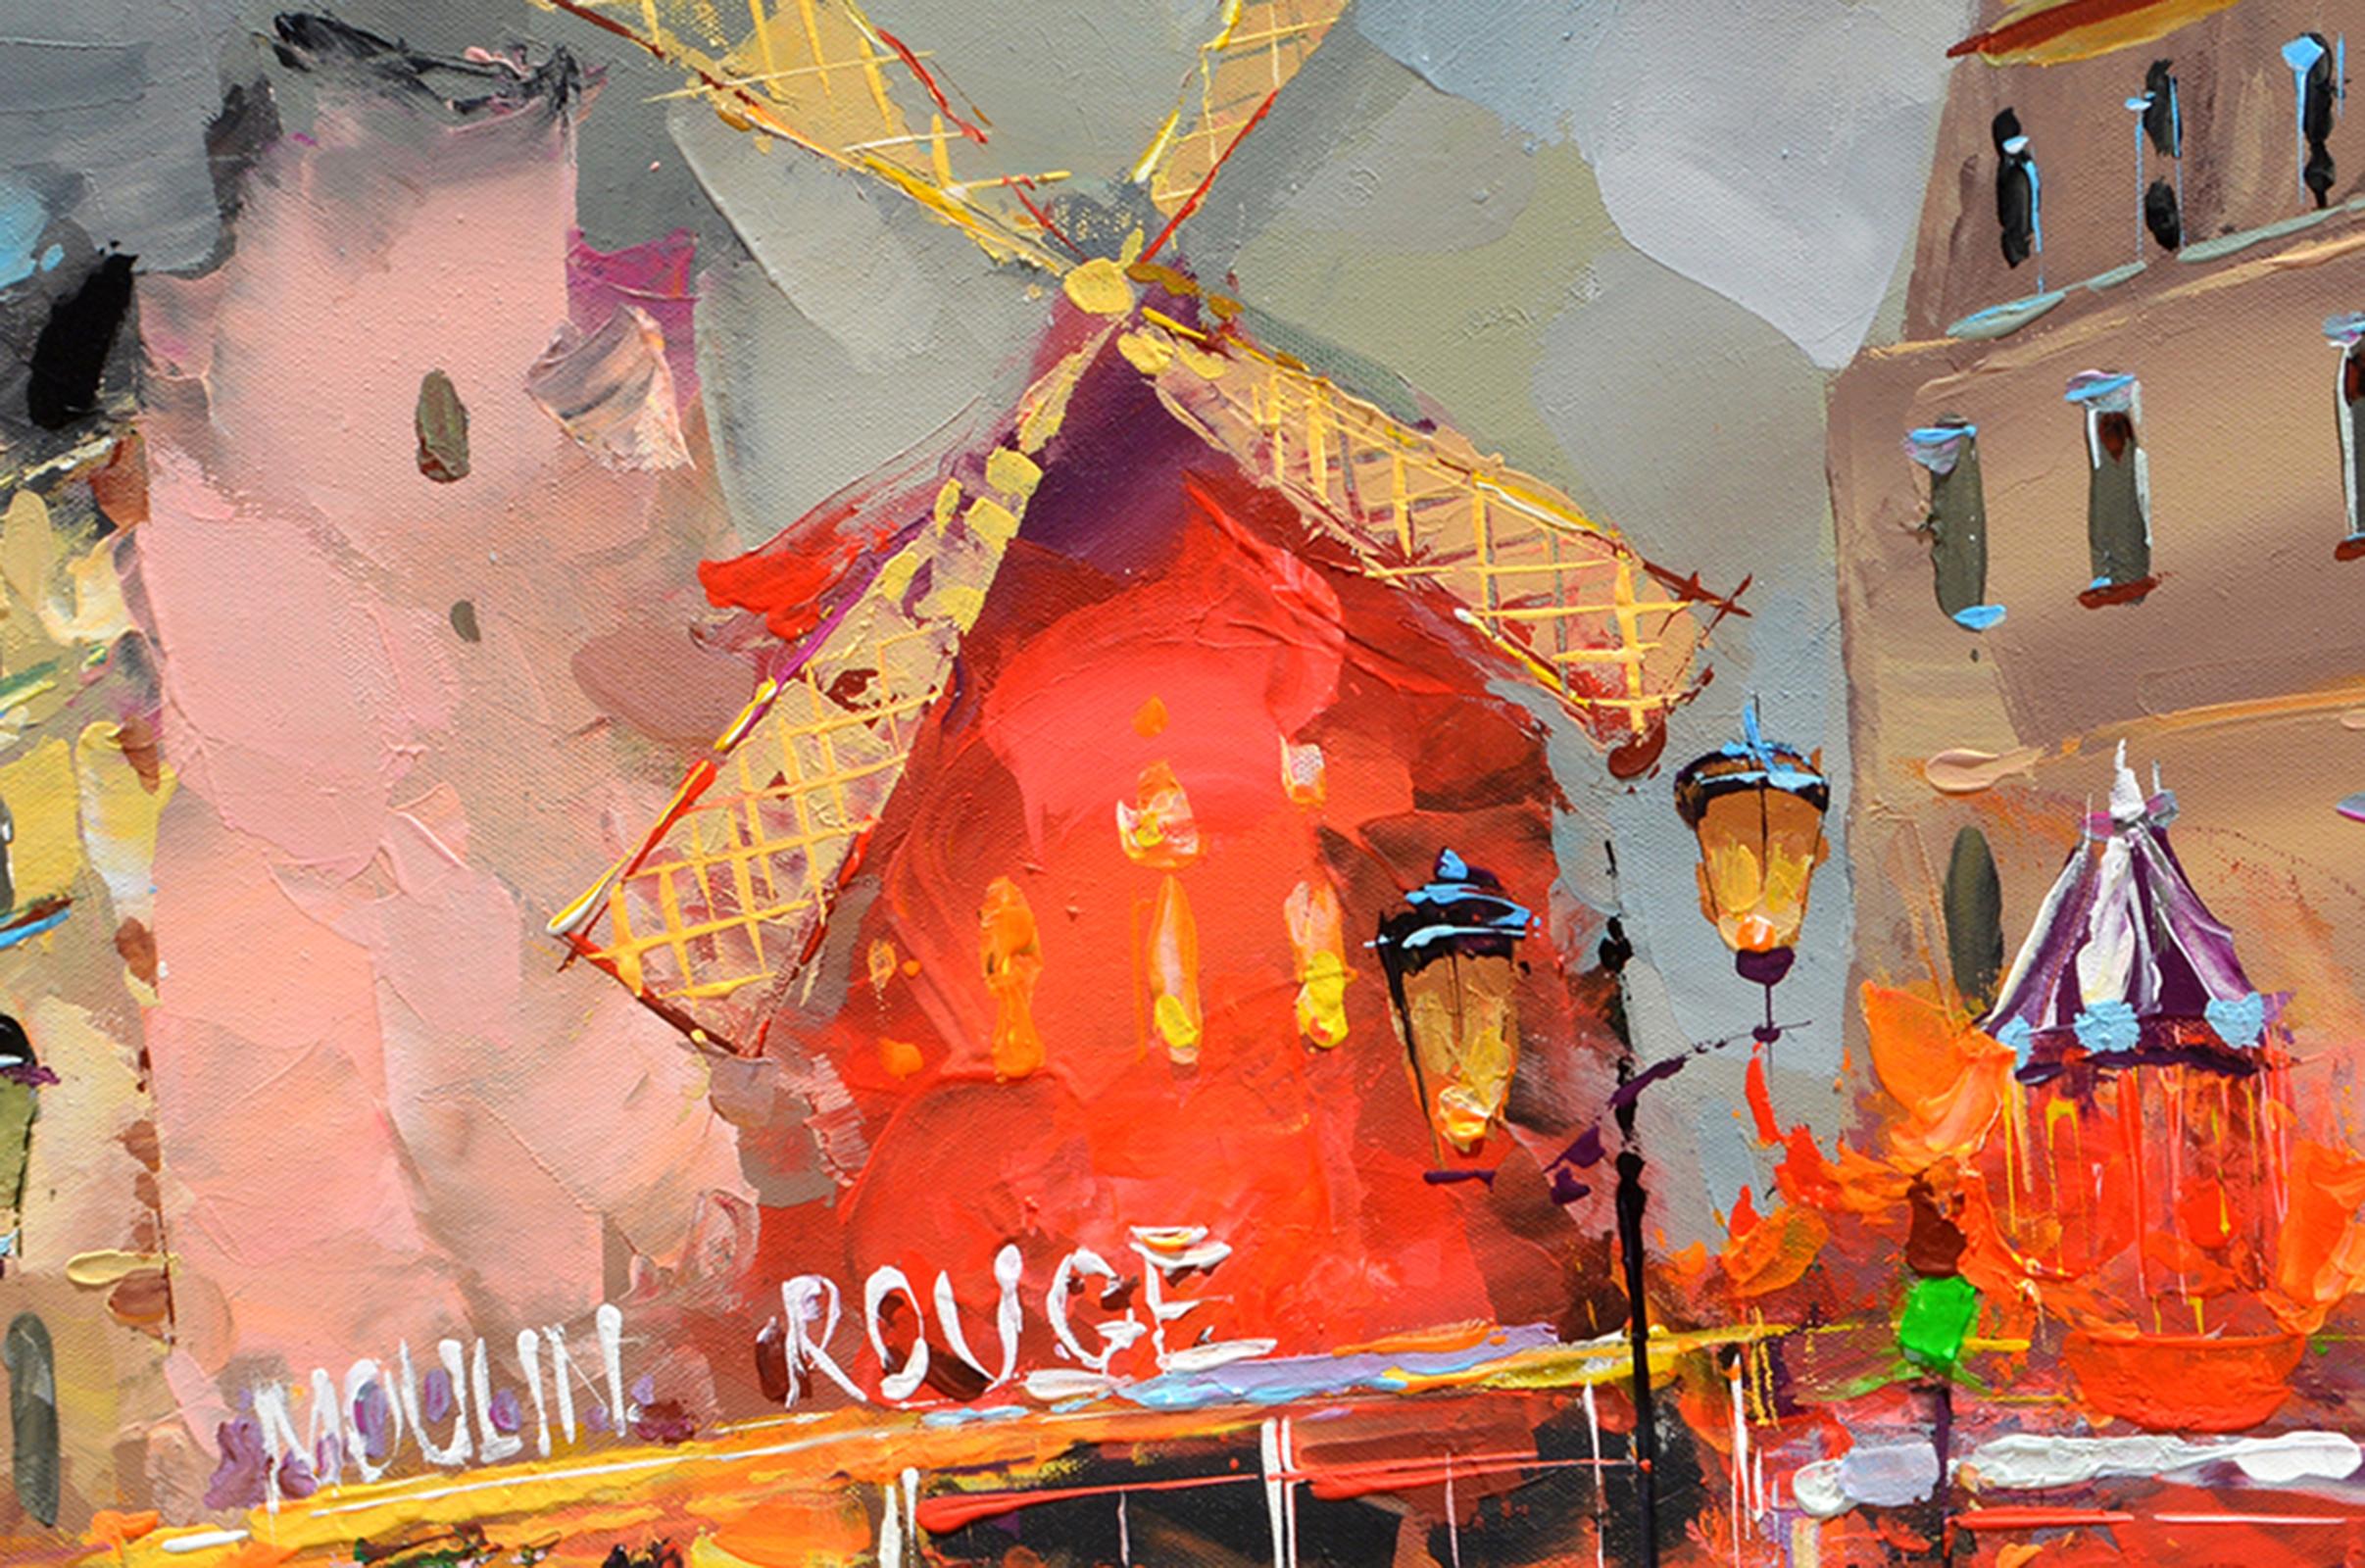 Moulin Rouge Late Night Show - Impressionist Painting by Dmitry Spiros